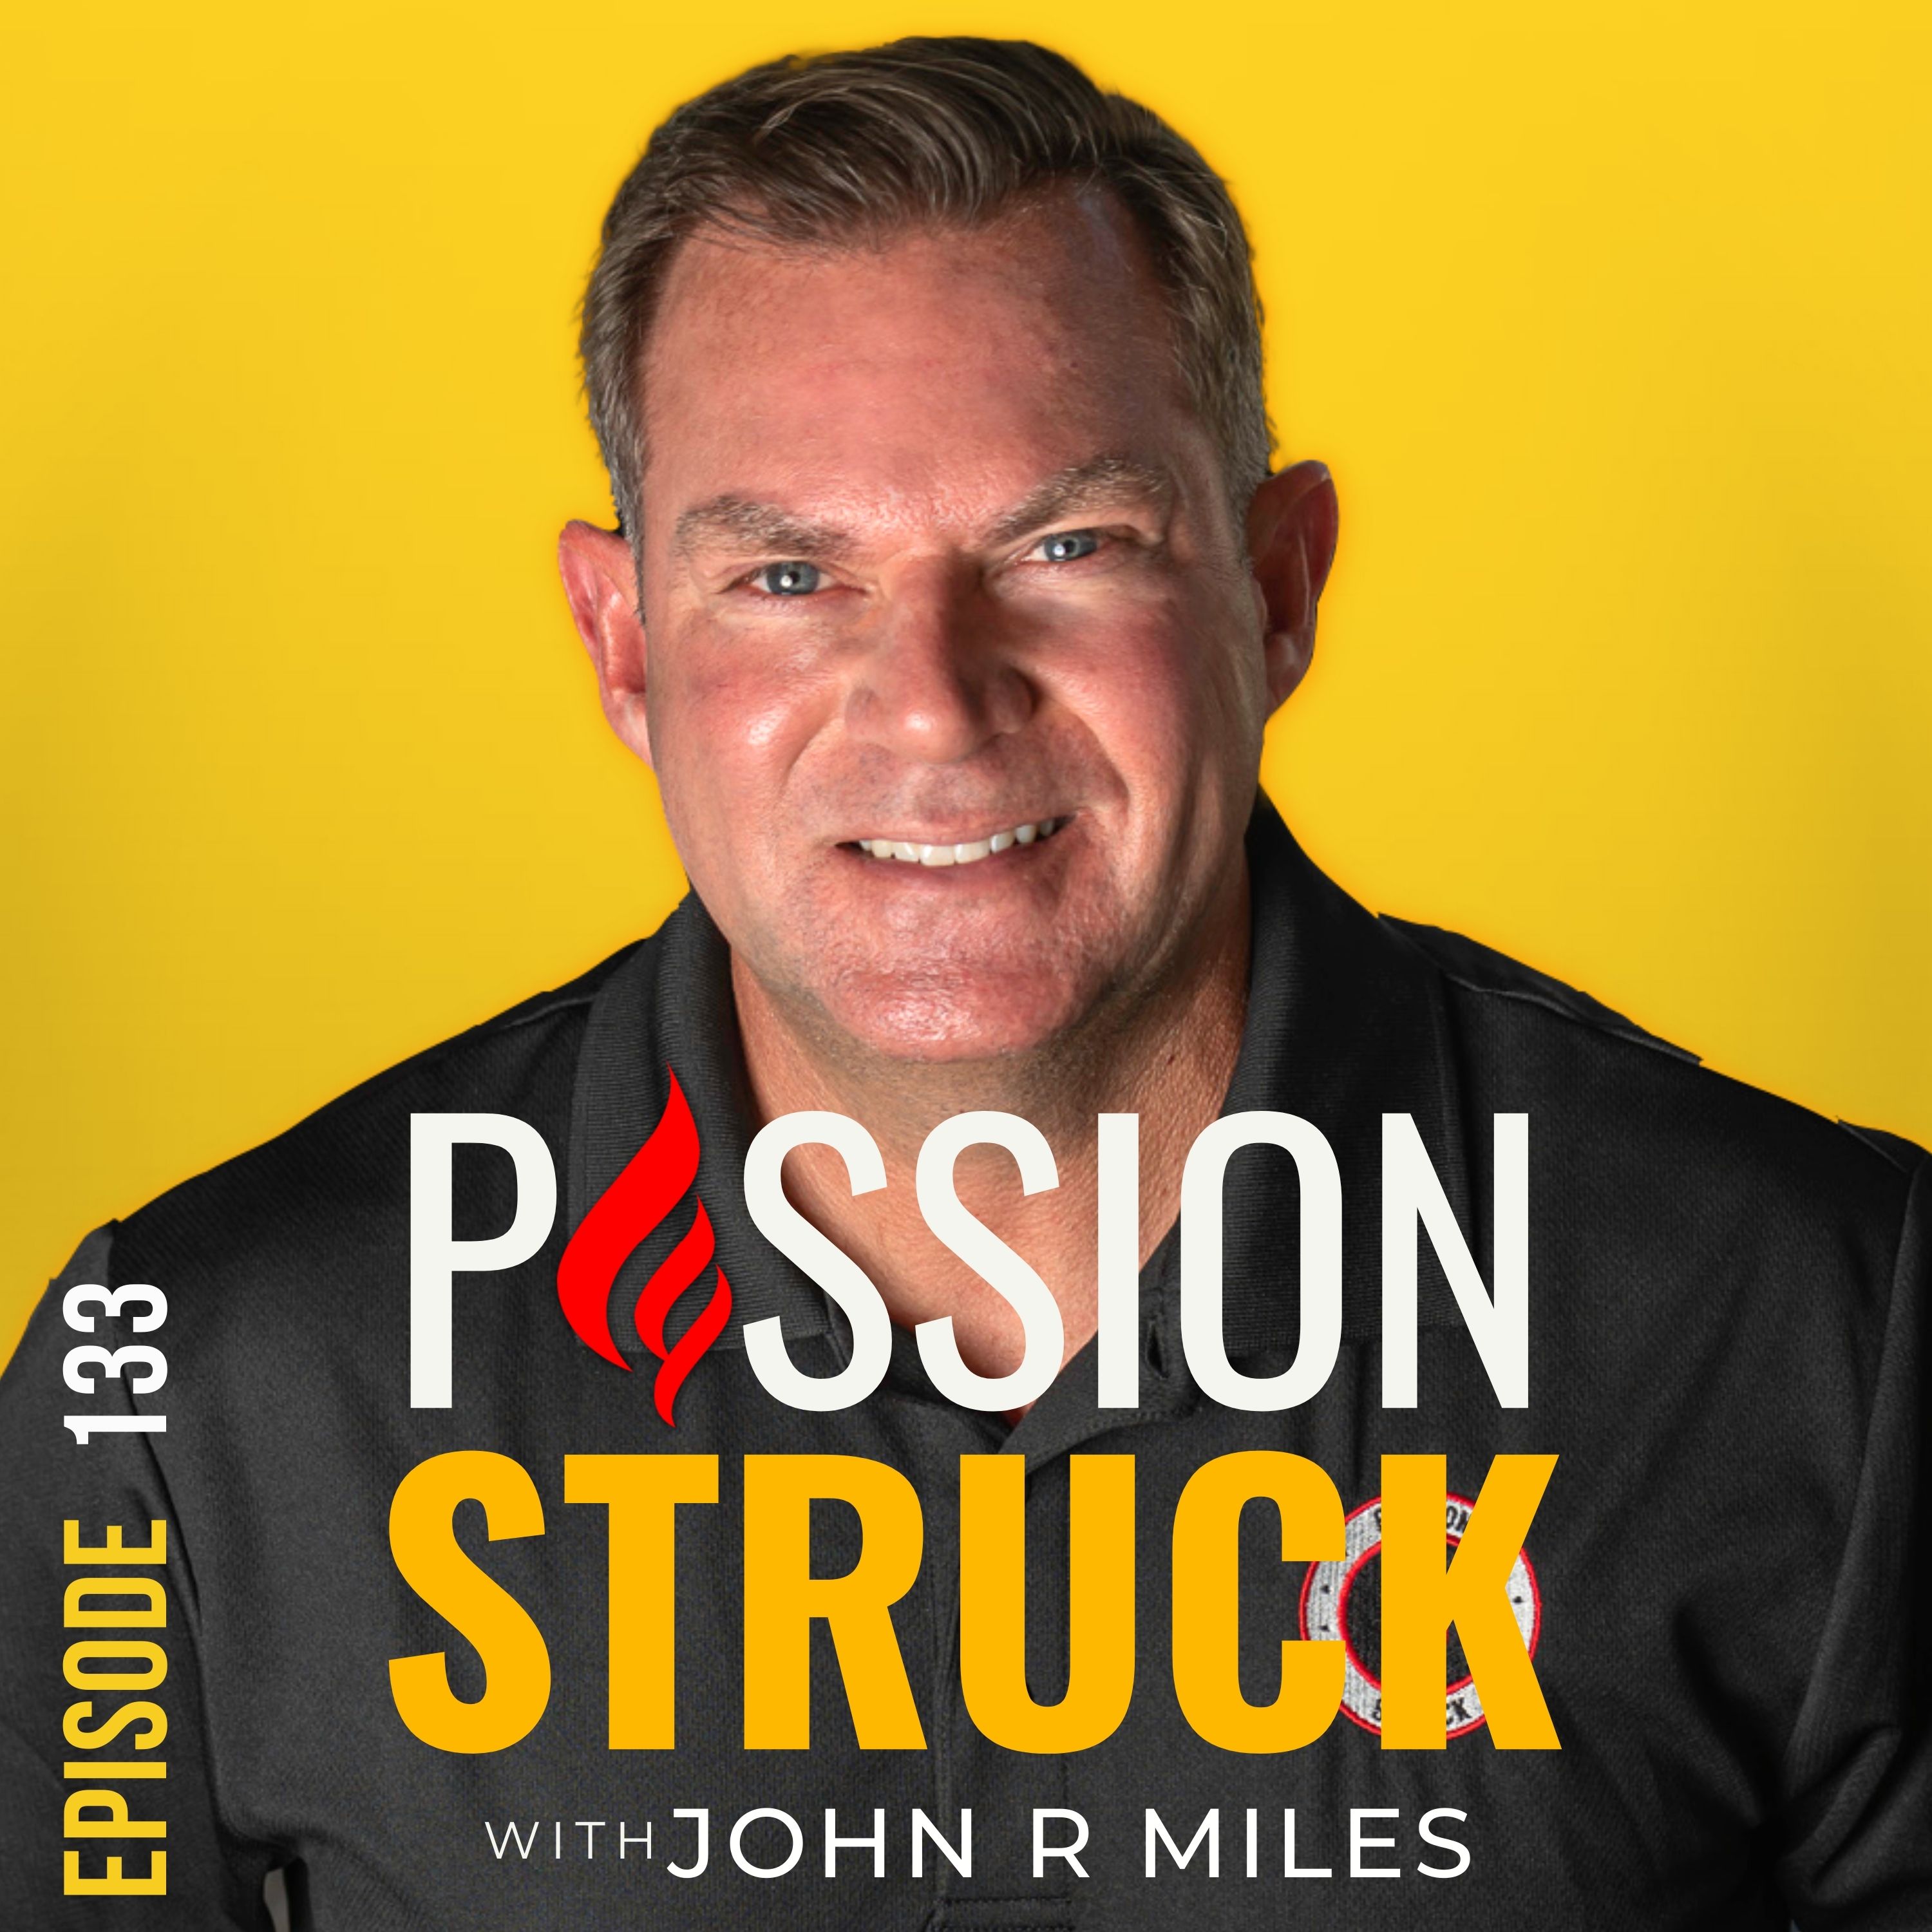 Passion Struck with John R. Miles episode 133 thumbnail on accepting yourself